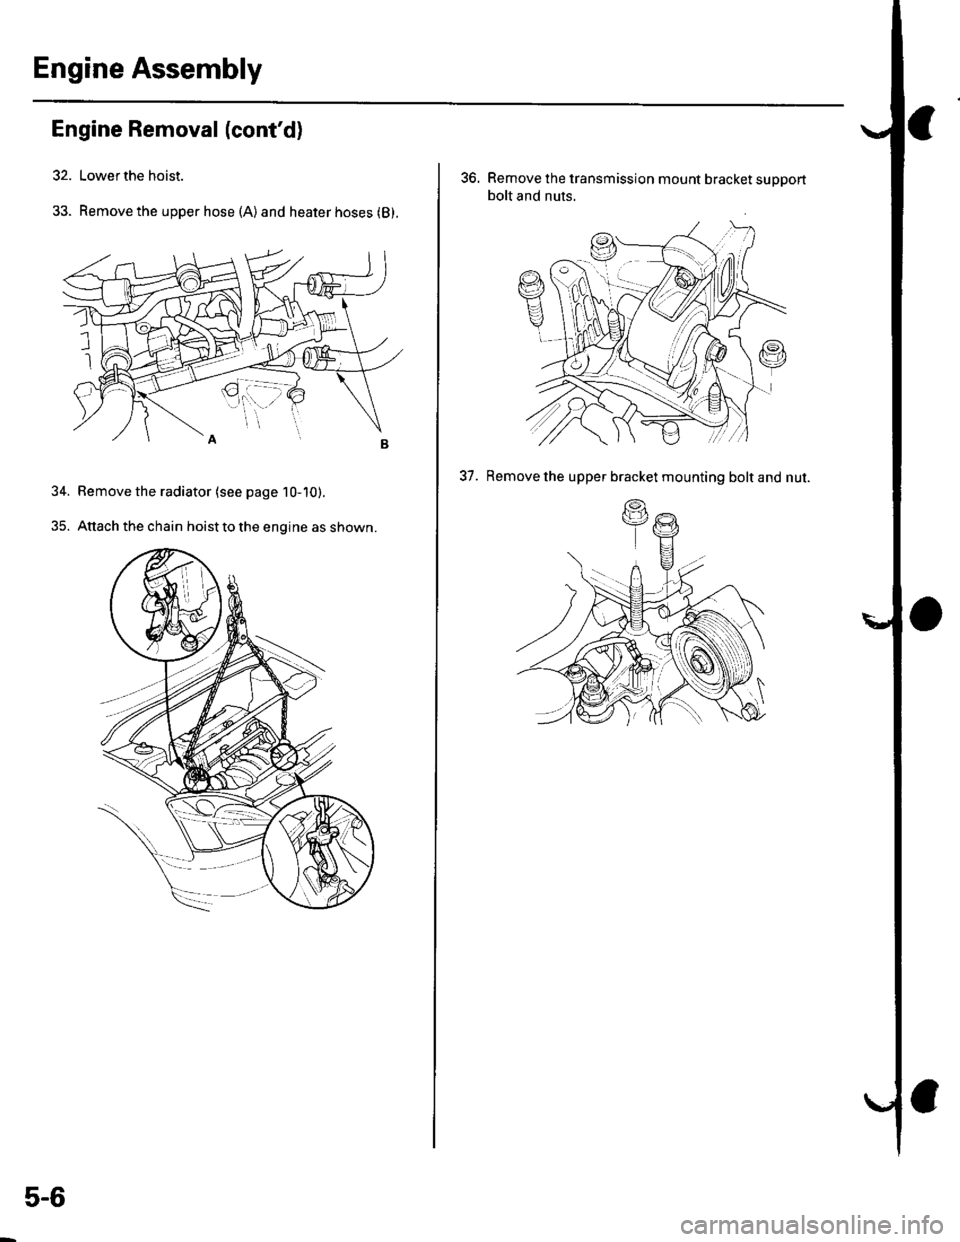 HONDA CIVIC 2002 7.G Workshop Manual Engine Assembly
Engine Removal (contd)
32. Lower the hoist.
33. Remove the upper hose (A)and heater hoses (B).
34. Bemove the radiator (see page 10-10).
35. Attach the chain hoist to the engine as sh